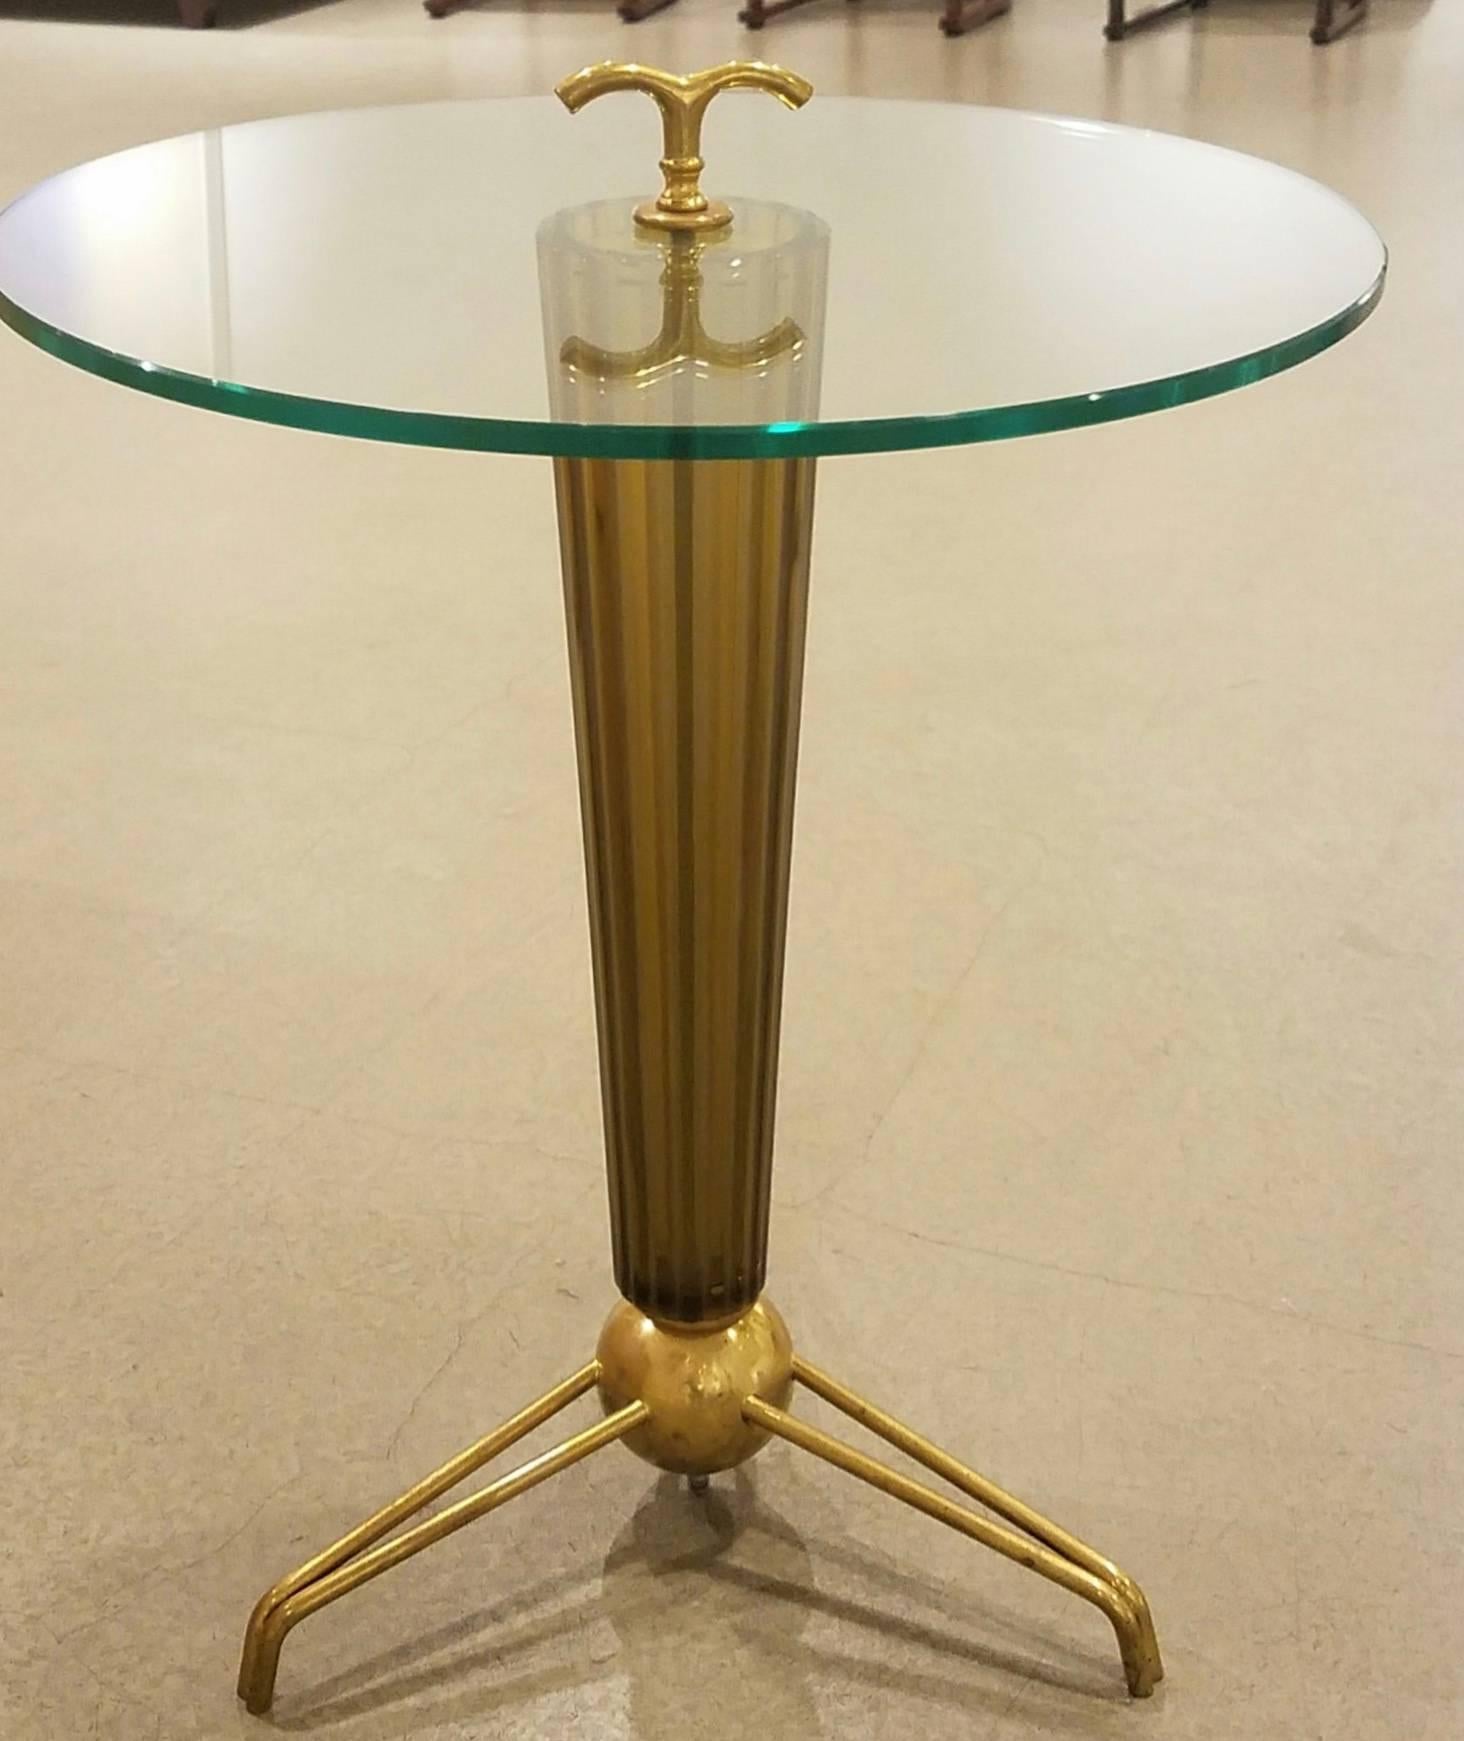 An Italian Mid-Century circular table with a clear glass top surmounted by a shaped brass finial supported by a thick conical, fluted, handblown Murano amber/bronze toned glass base capped by a large brass ball resting on a brass tripod base.